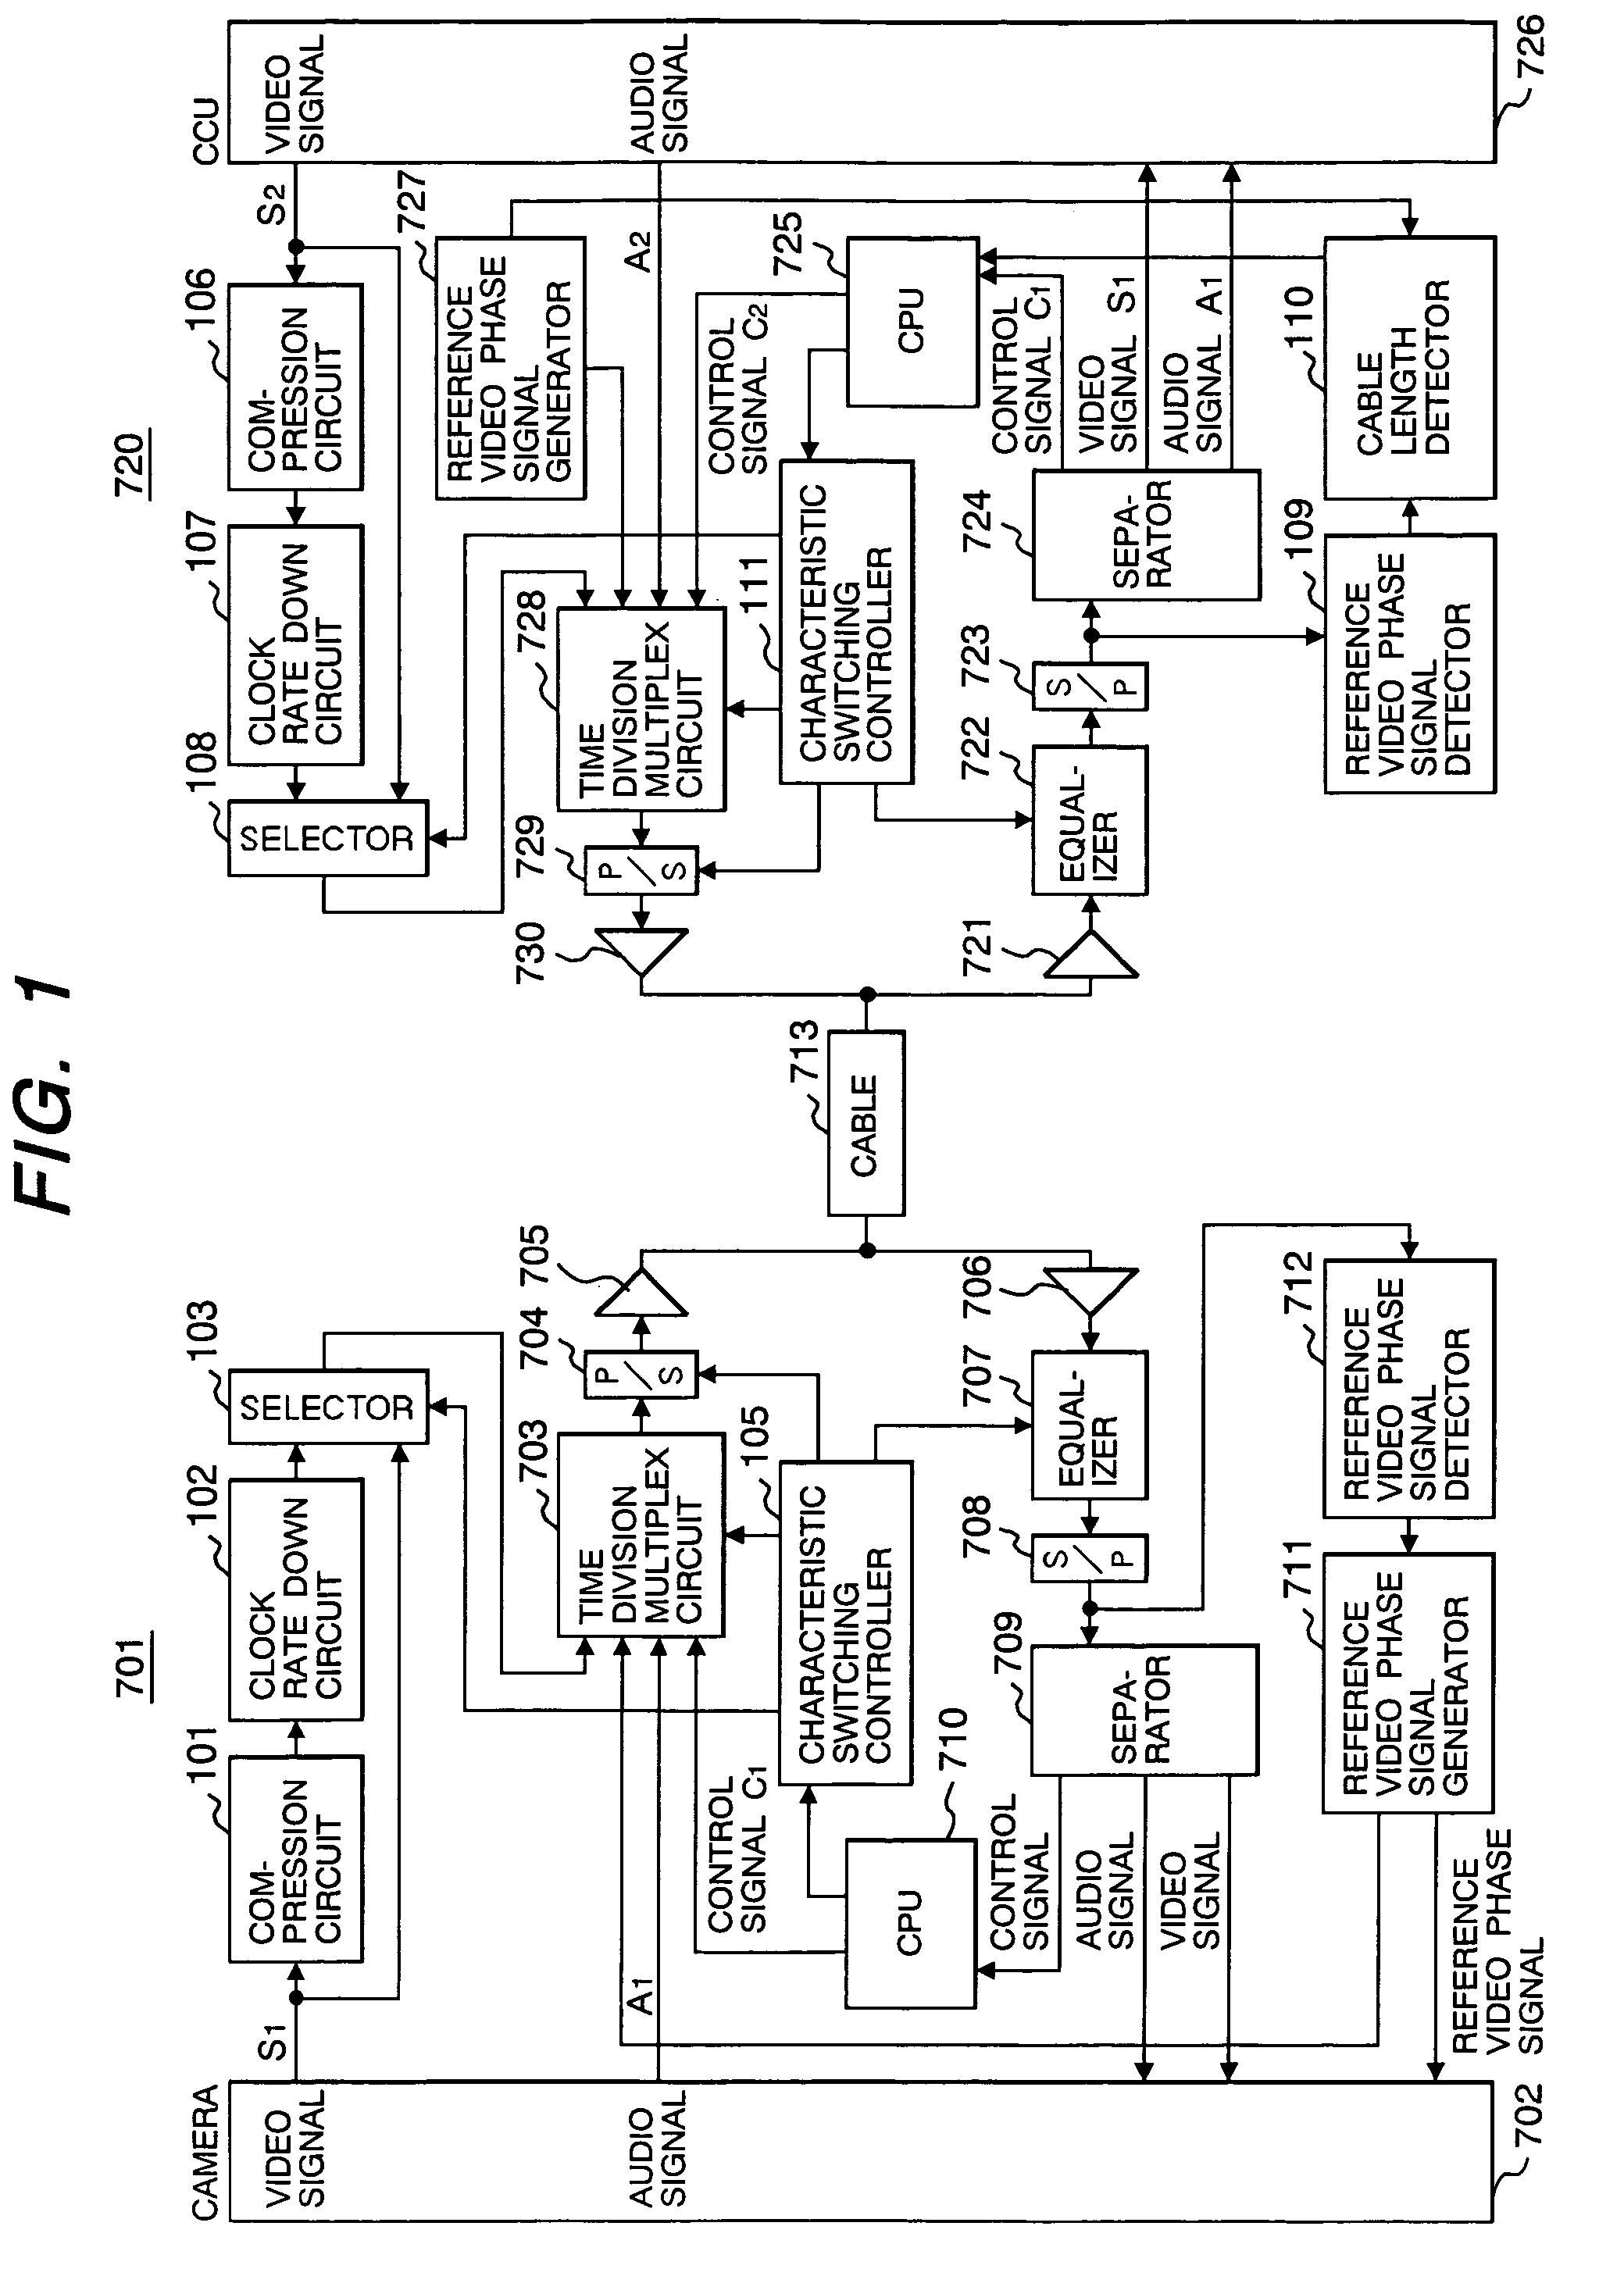 Method of a signal transmission for controlling a quantity of data transmitted and a signal transmission apparatus therefor